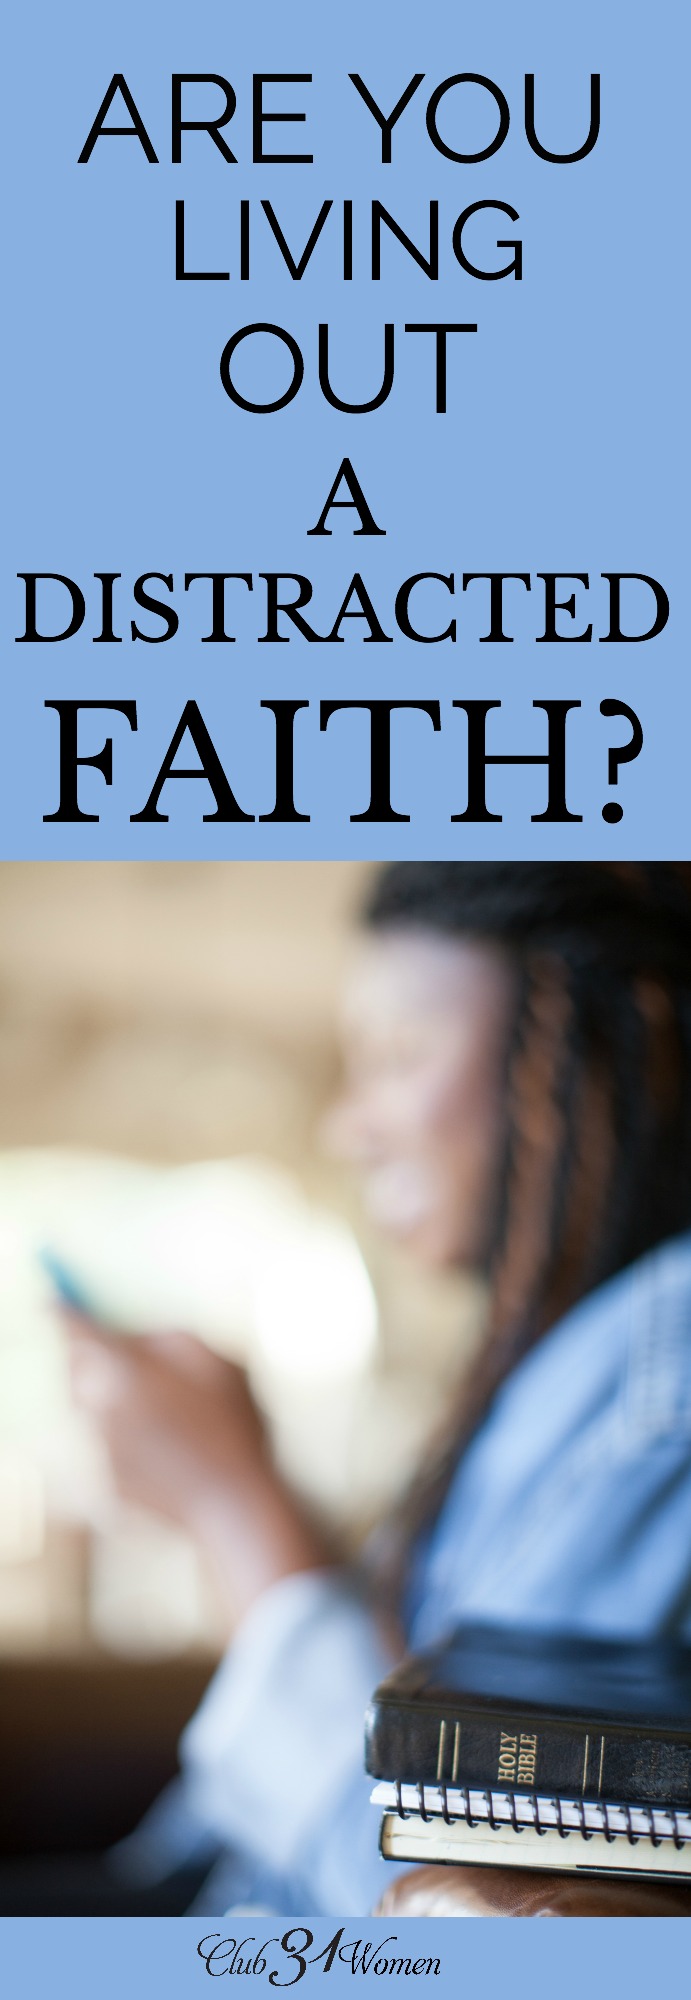 Living out a distracted faith will leave us spiritually weak and confused. Our hearts will struggle to commit and to grow when we are constantly diverted. via @Club31Women